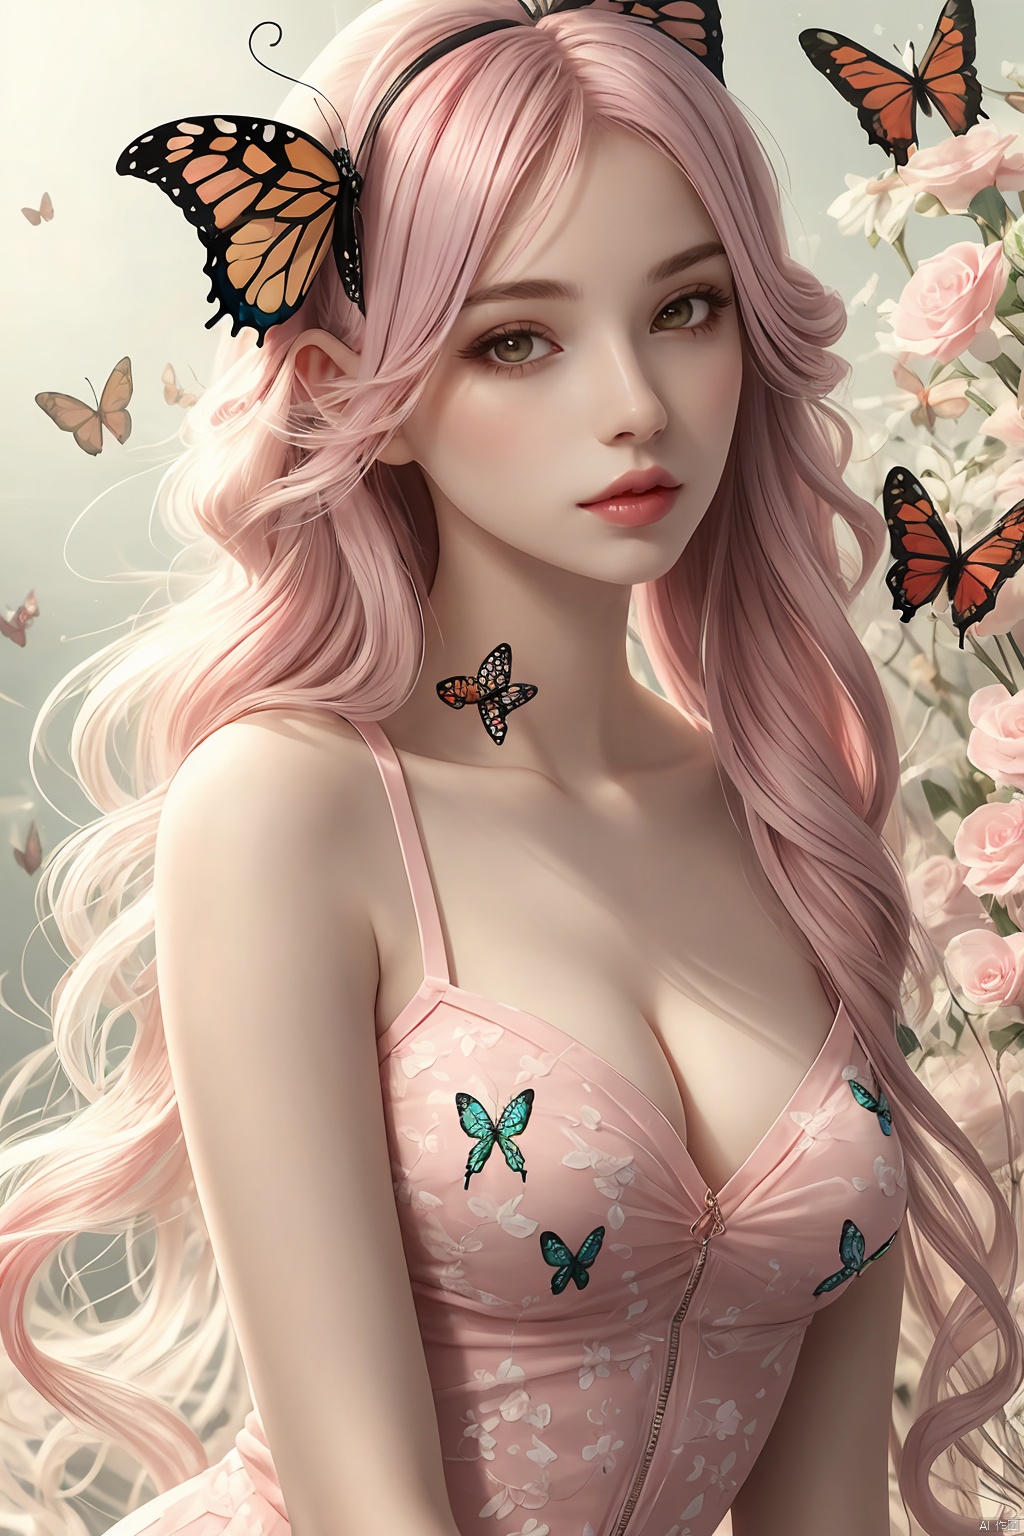 Girl, half body, pink hair, lips, butterfly hairpin, floral background, plenty of details, ultra high definition,